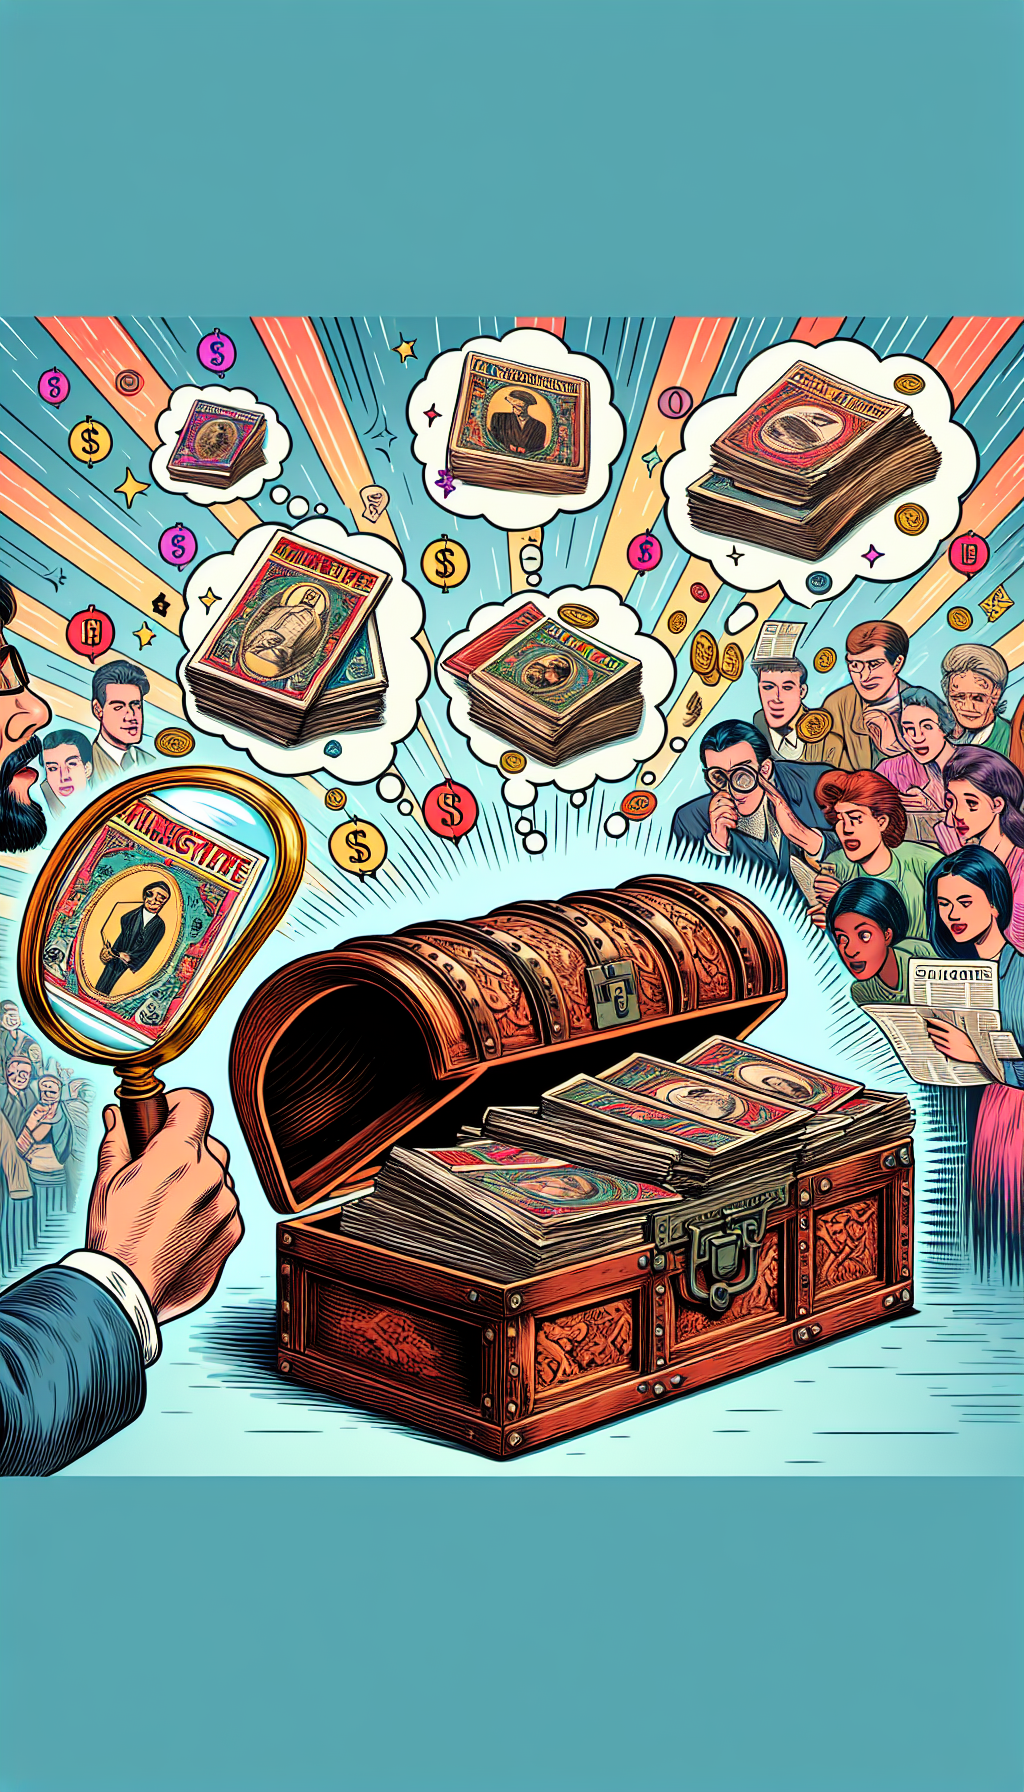 An illustration of a classic, ornate treasure chest overflowing with vintage Playboy magazines, each with a gleaming price tag. A caricatured merchant with a magnifying glass scrutinizes a prominent issue, while in the background, hand-drawn figures exchange issues with vibrant, animated dollar signs and collector cards popping above their heads in a comic-style thought bubble.